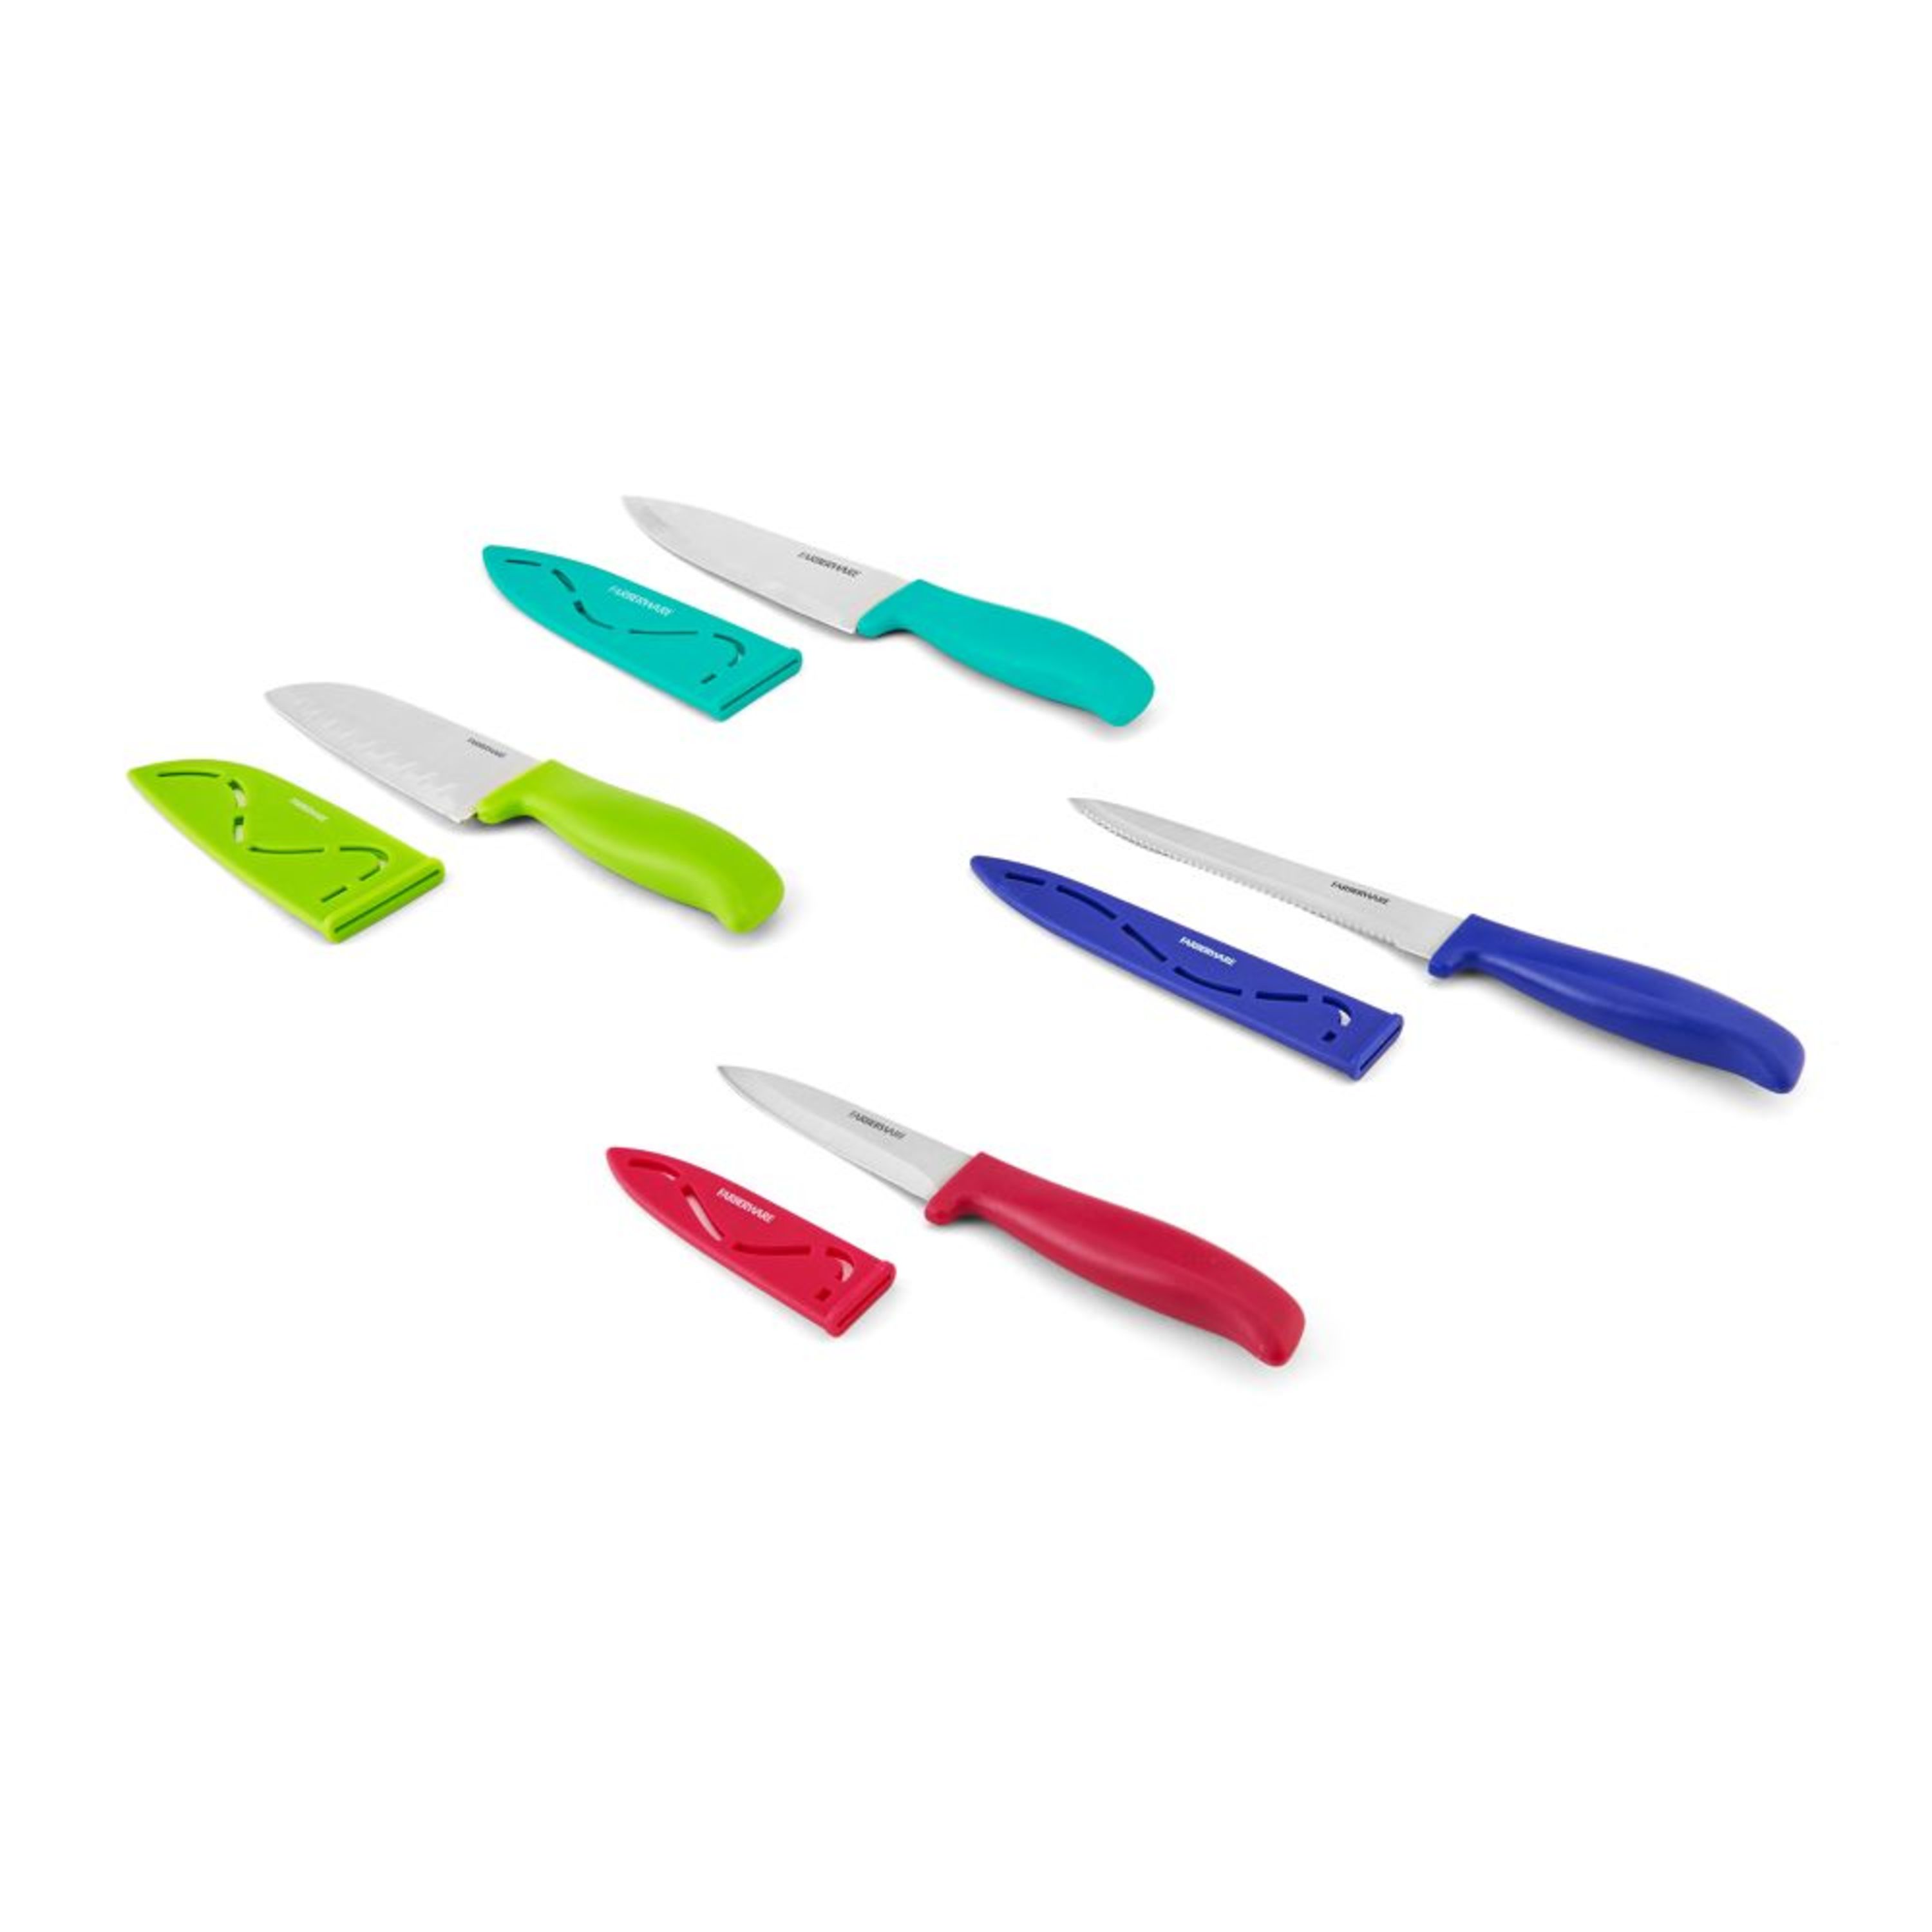 Farberware 4-piece Stamped Prep Knife Set Colored Plastic Handles - image 4 of 8